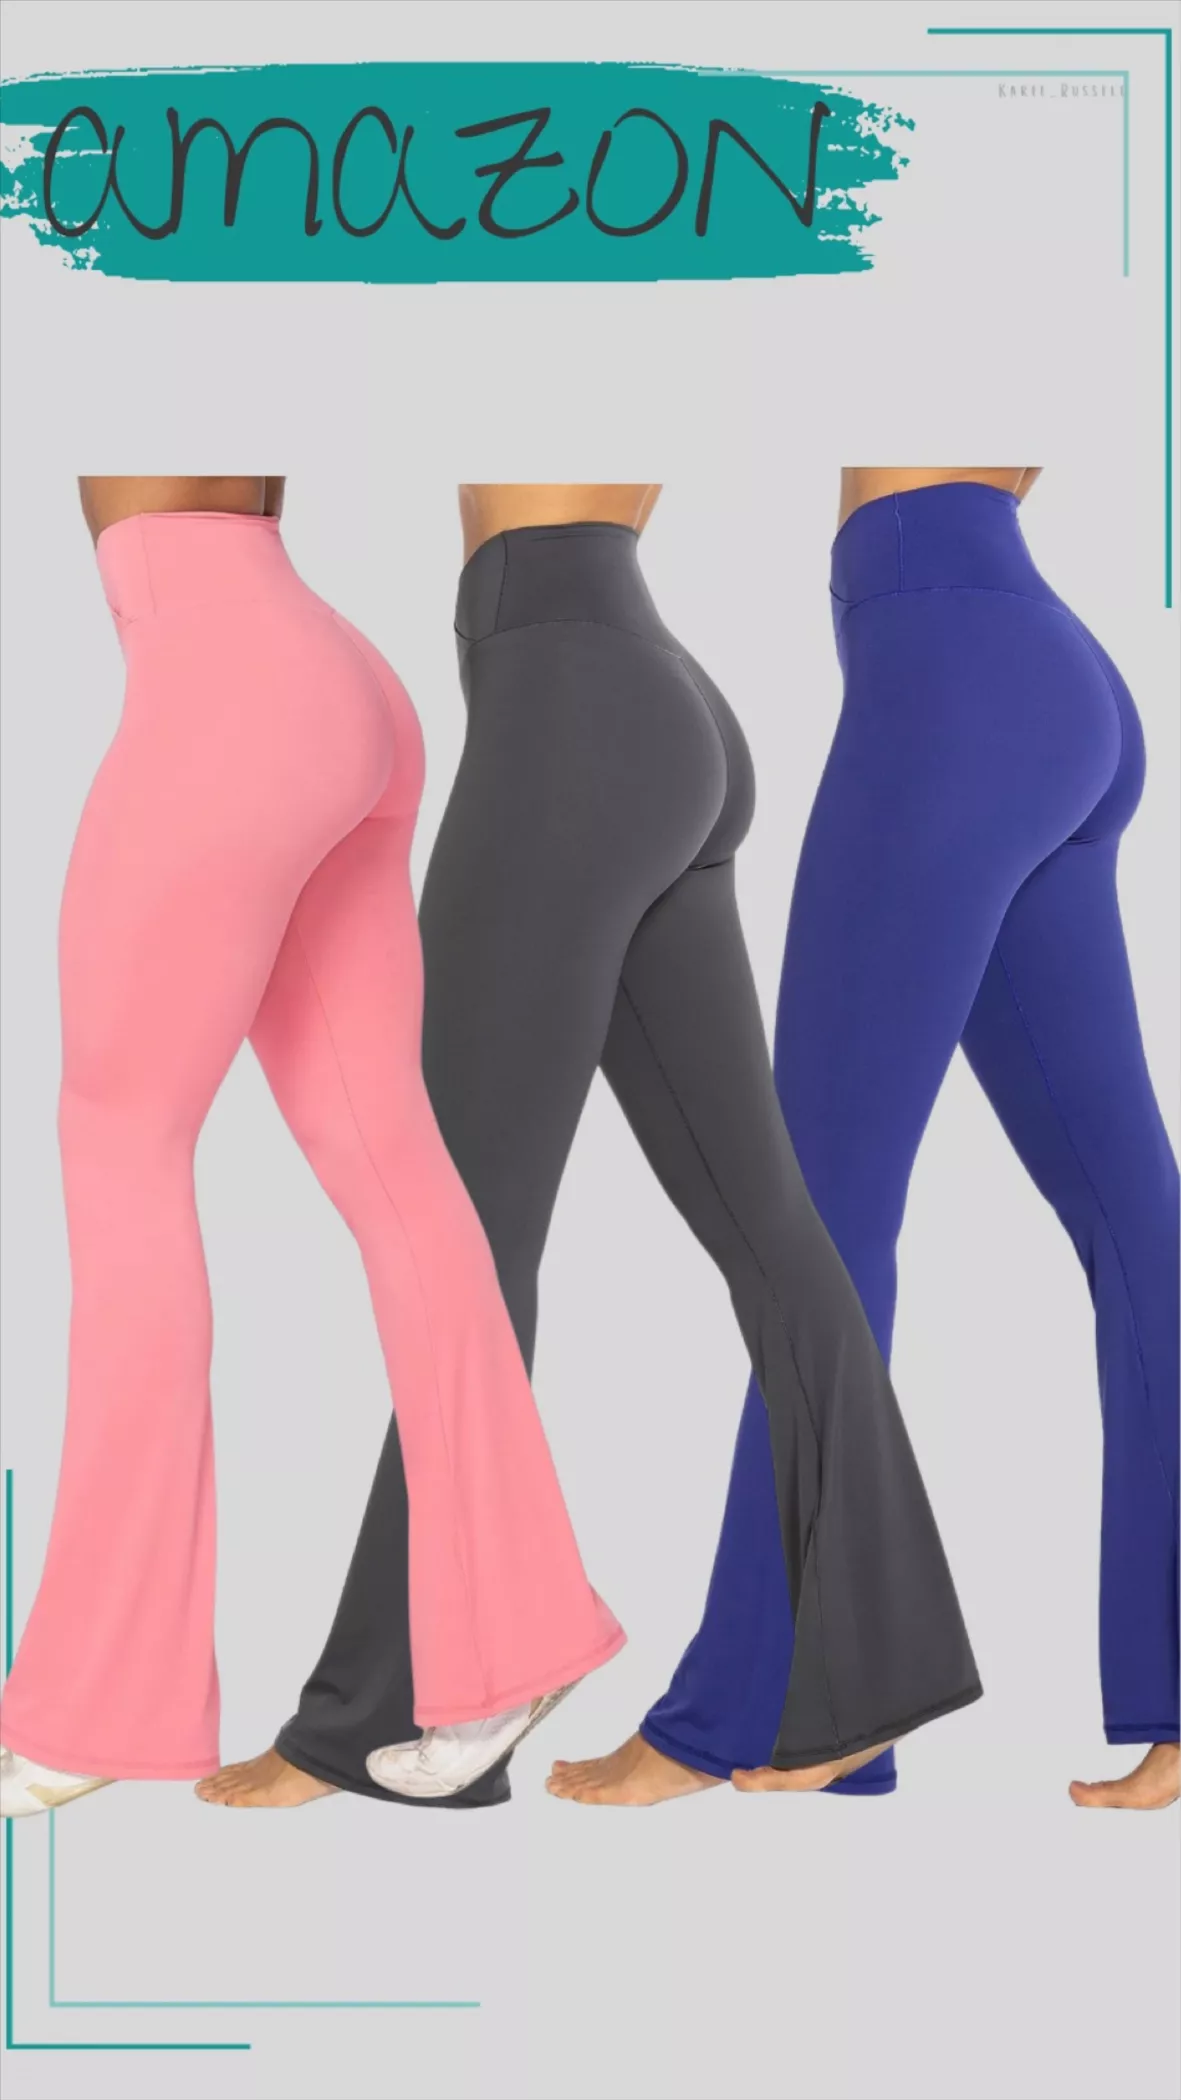 Pink Flare Yoga Pants for Women, V Crossover High Waisted Flare